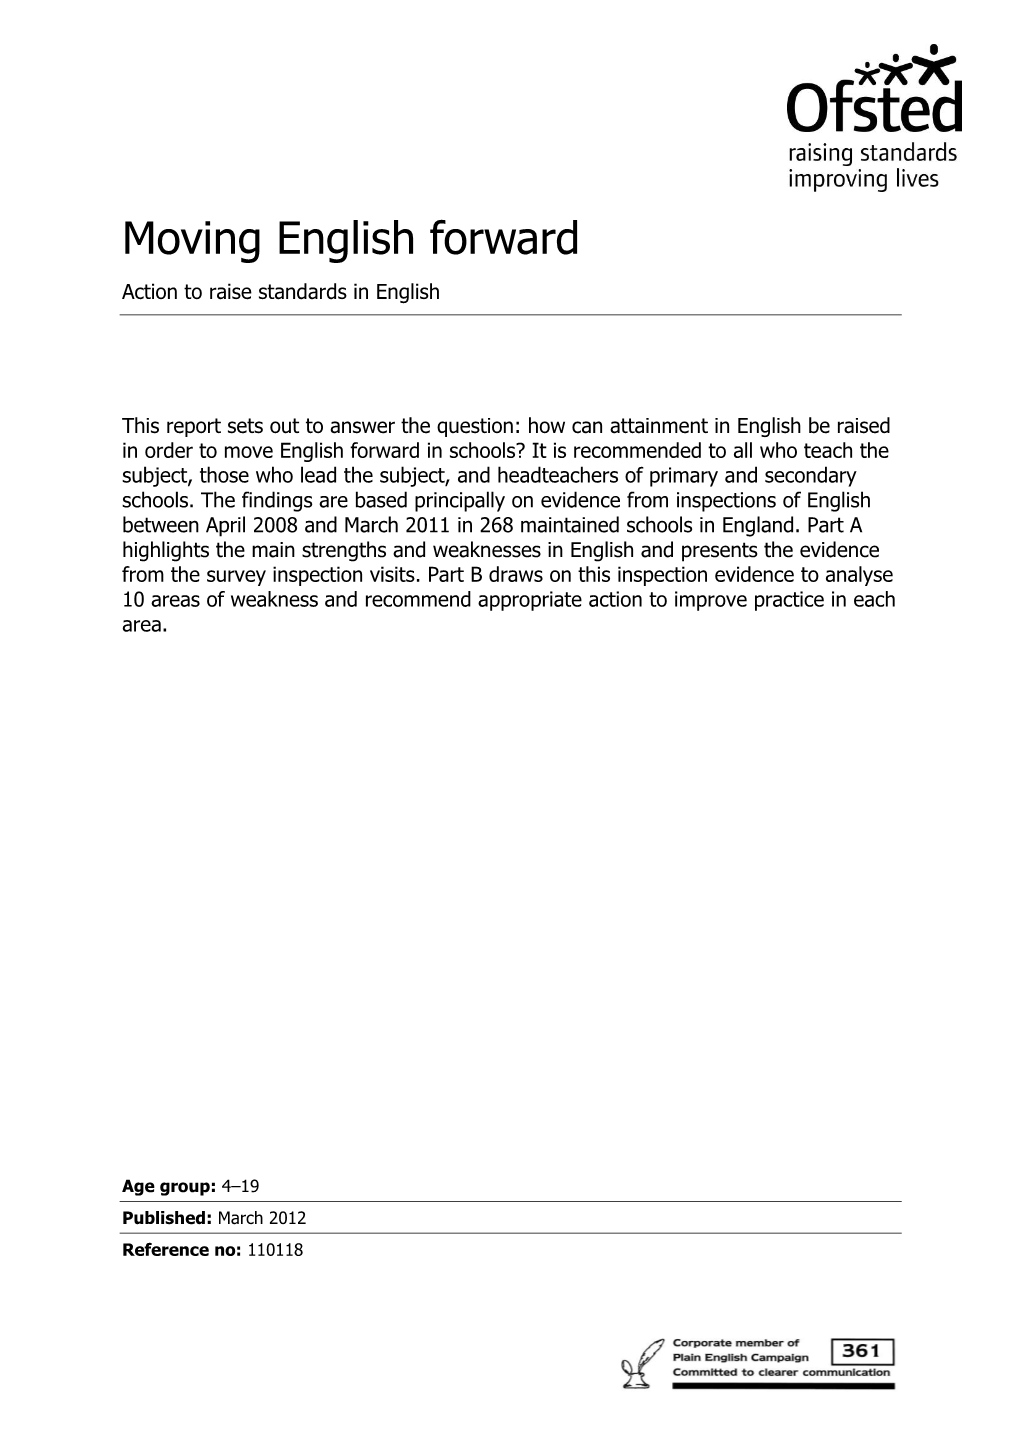 Moving English Forward Action to Raise Standards in English